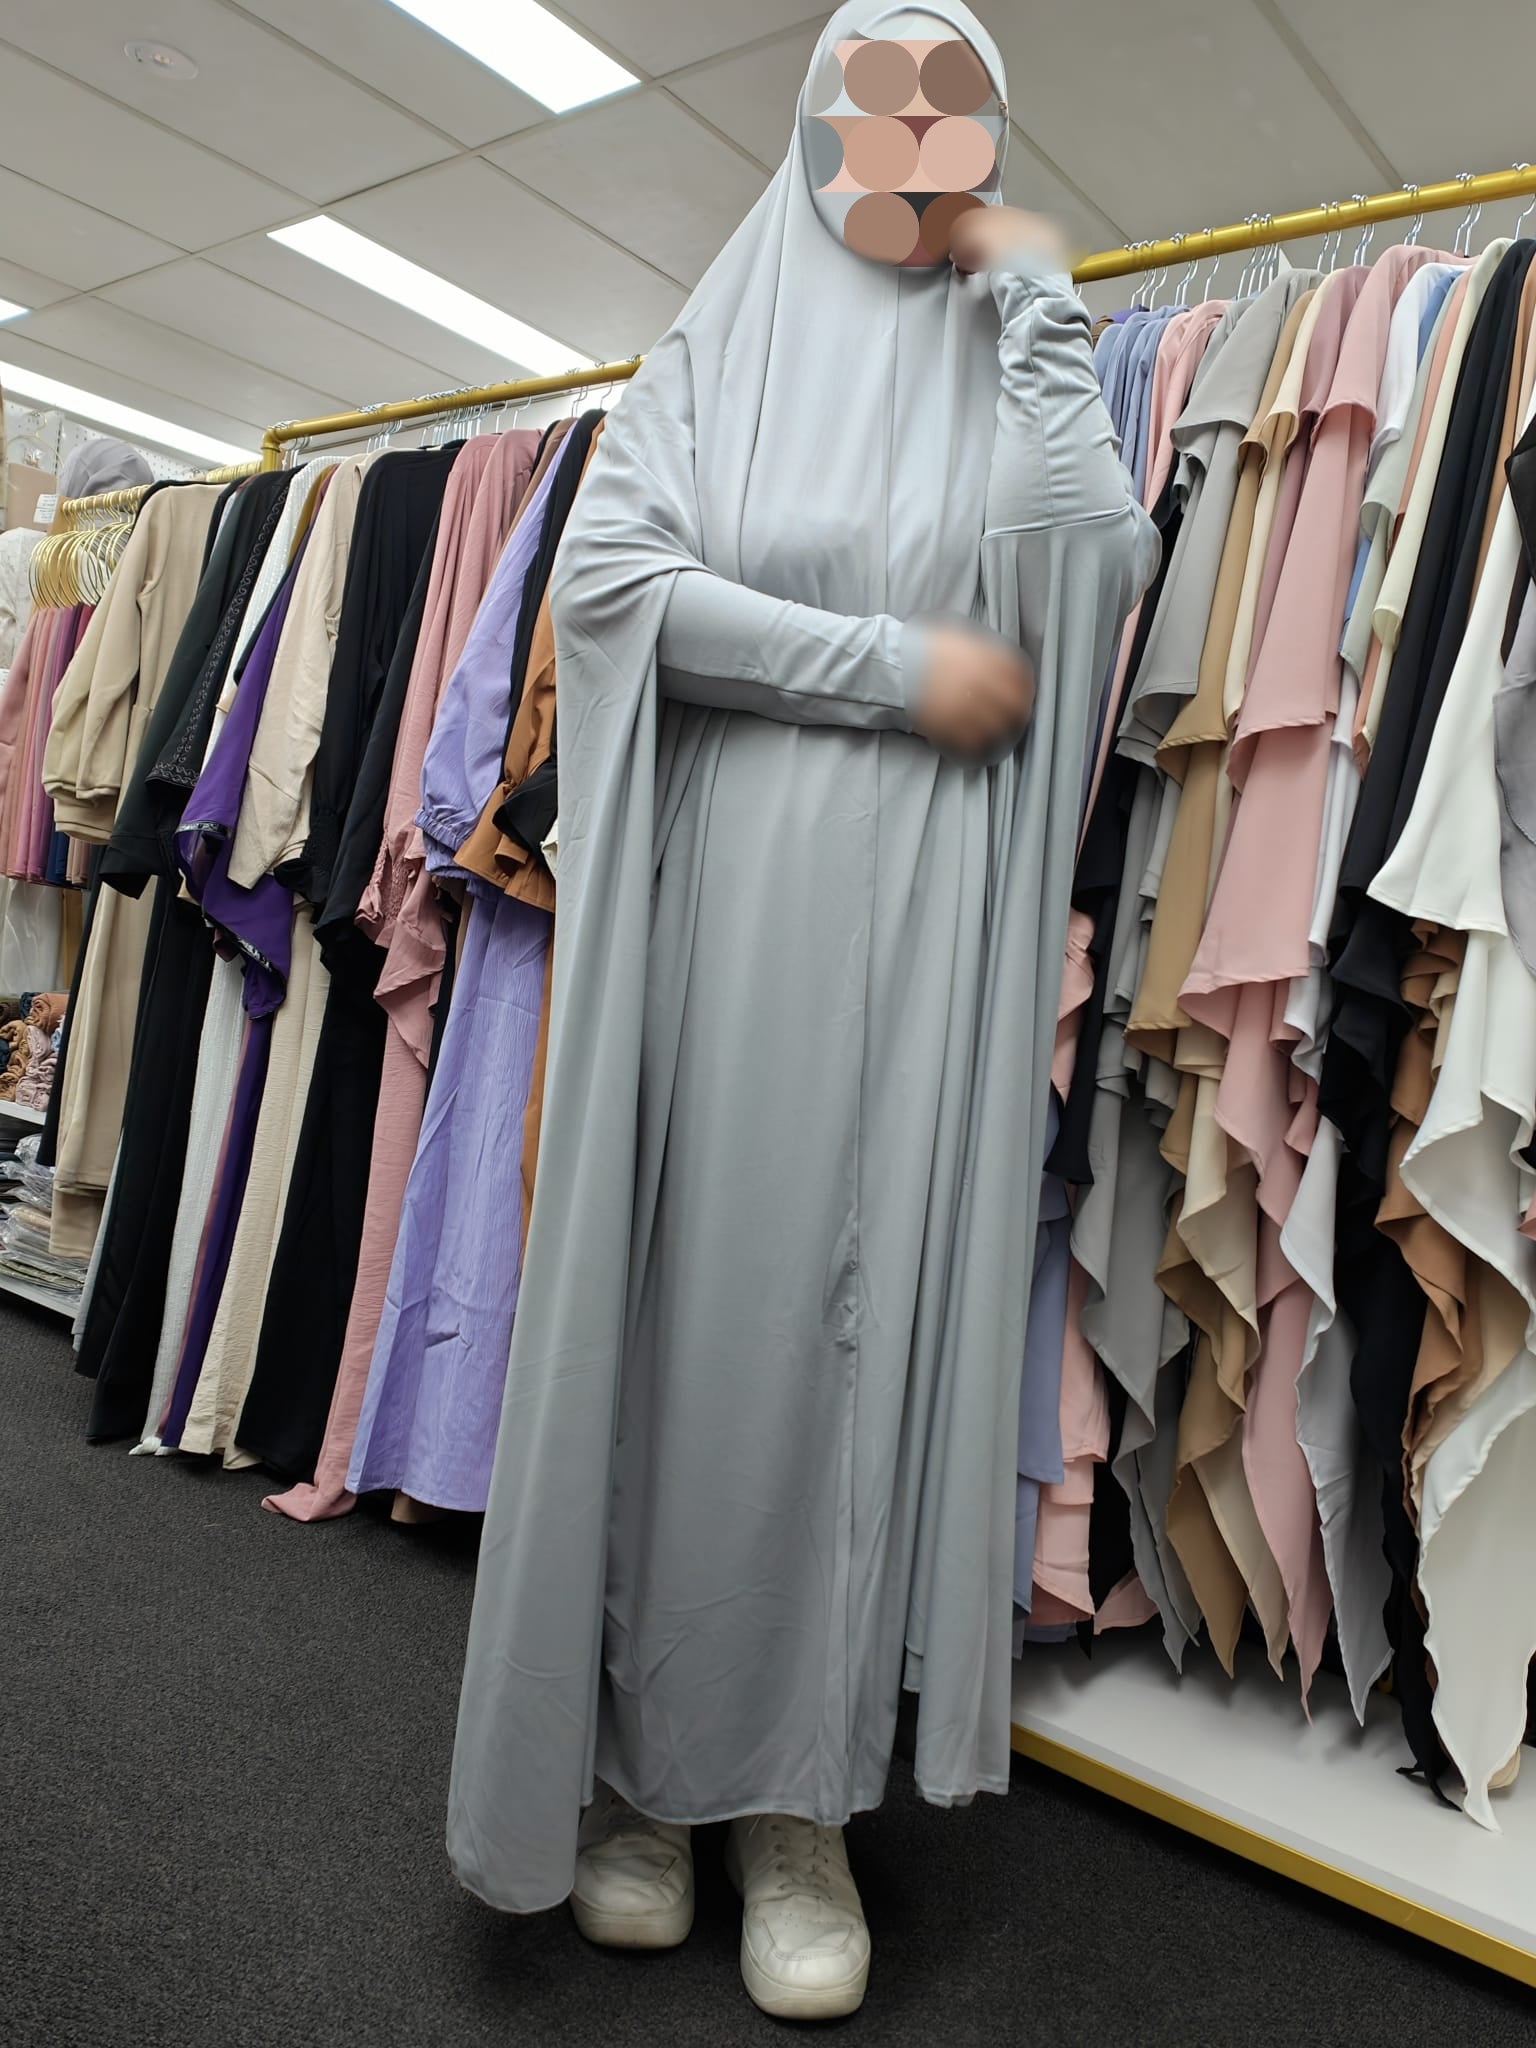 Elevate your modest fashion with our exclusive Premium Silver Grey Jilbab, crafted from premium ITY Knit fabric for unparalleled comfort and style. Experience the luxury of smooth, soft, and non-see-through jilbabs, offering ankle-length coverage at a reasonable price, only at Hikmah Boutique.